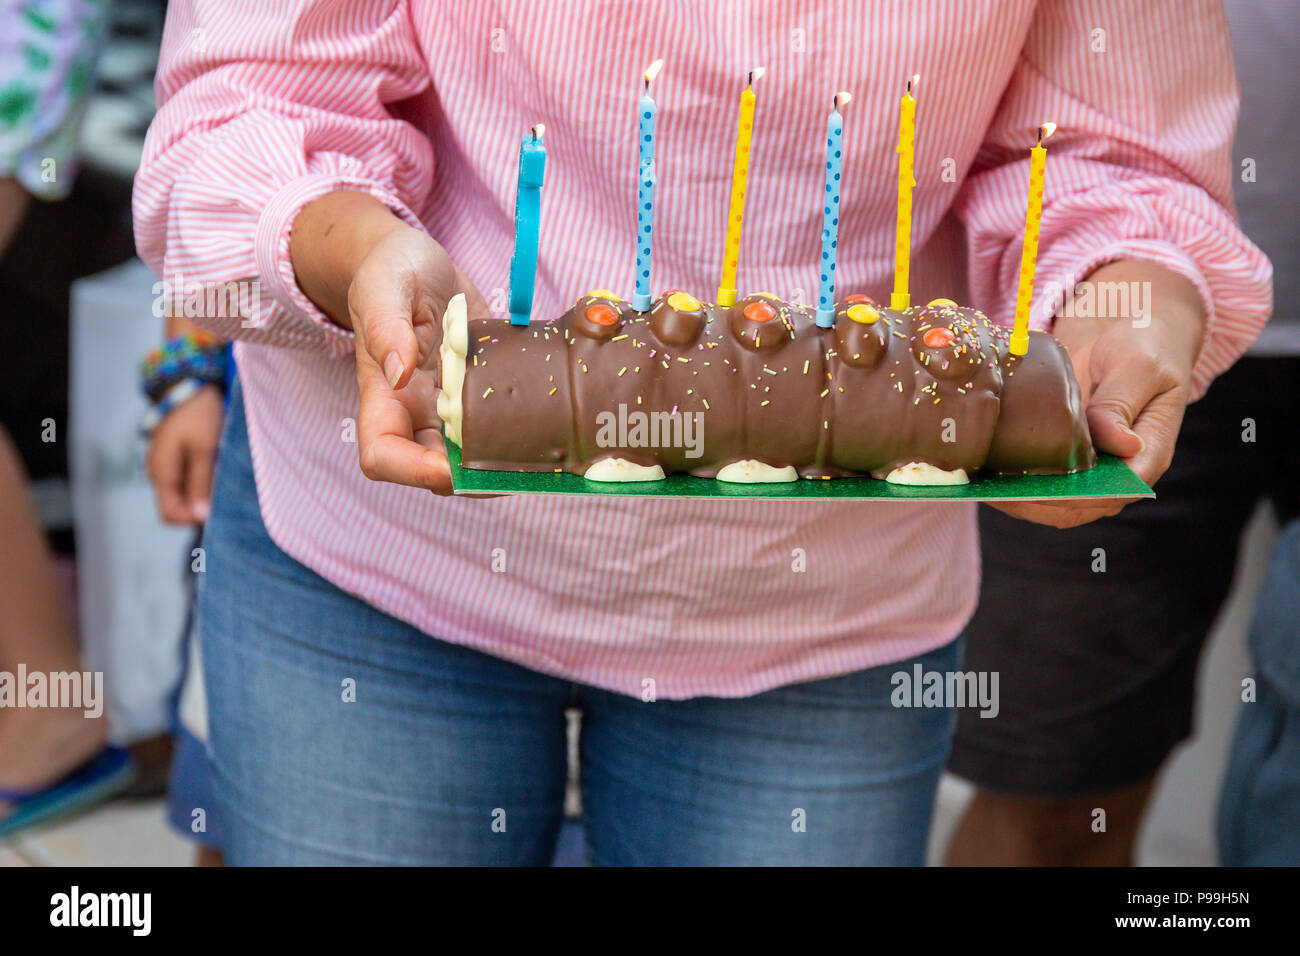 A woman carrying a chocolate log birthday cake with six lit candles Stock Photo